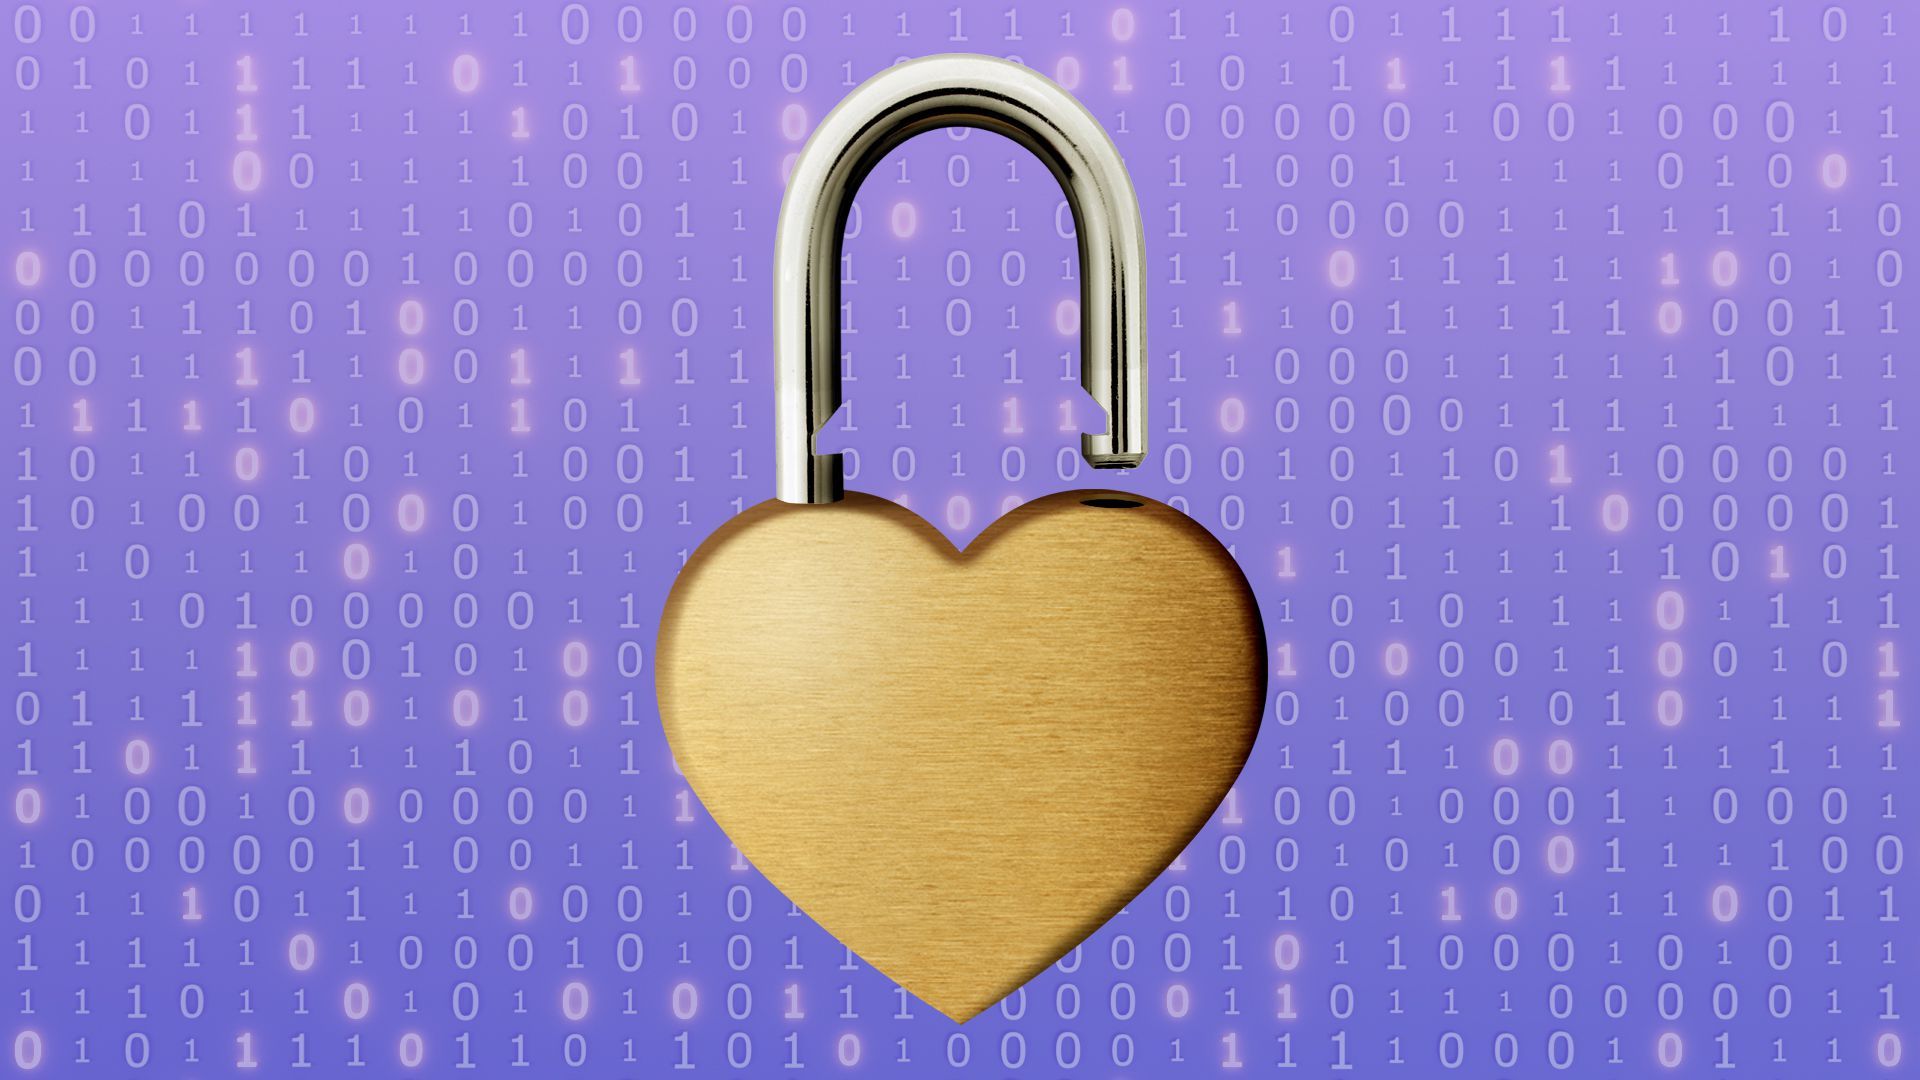 Illustration of a heart-shaped lock with a binary code background